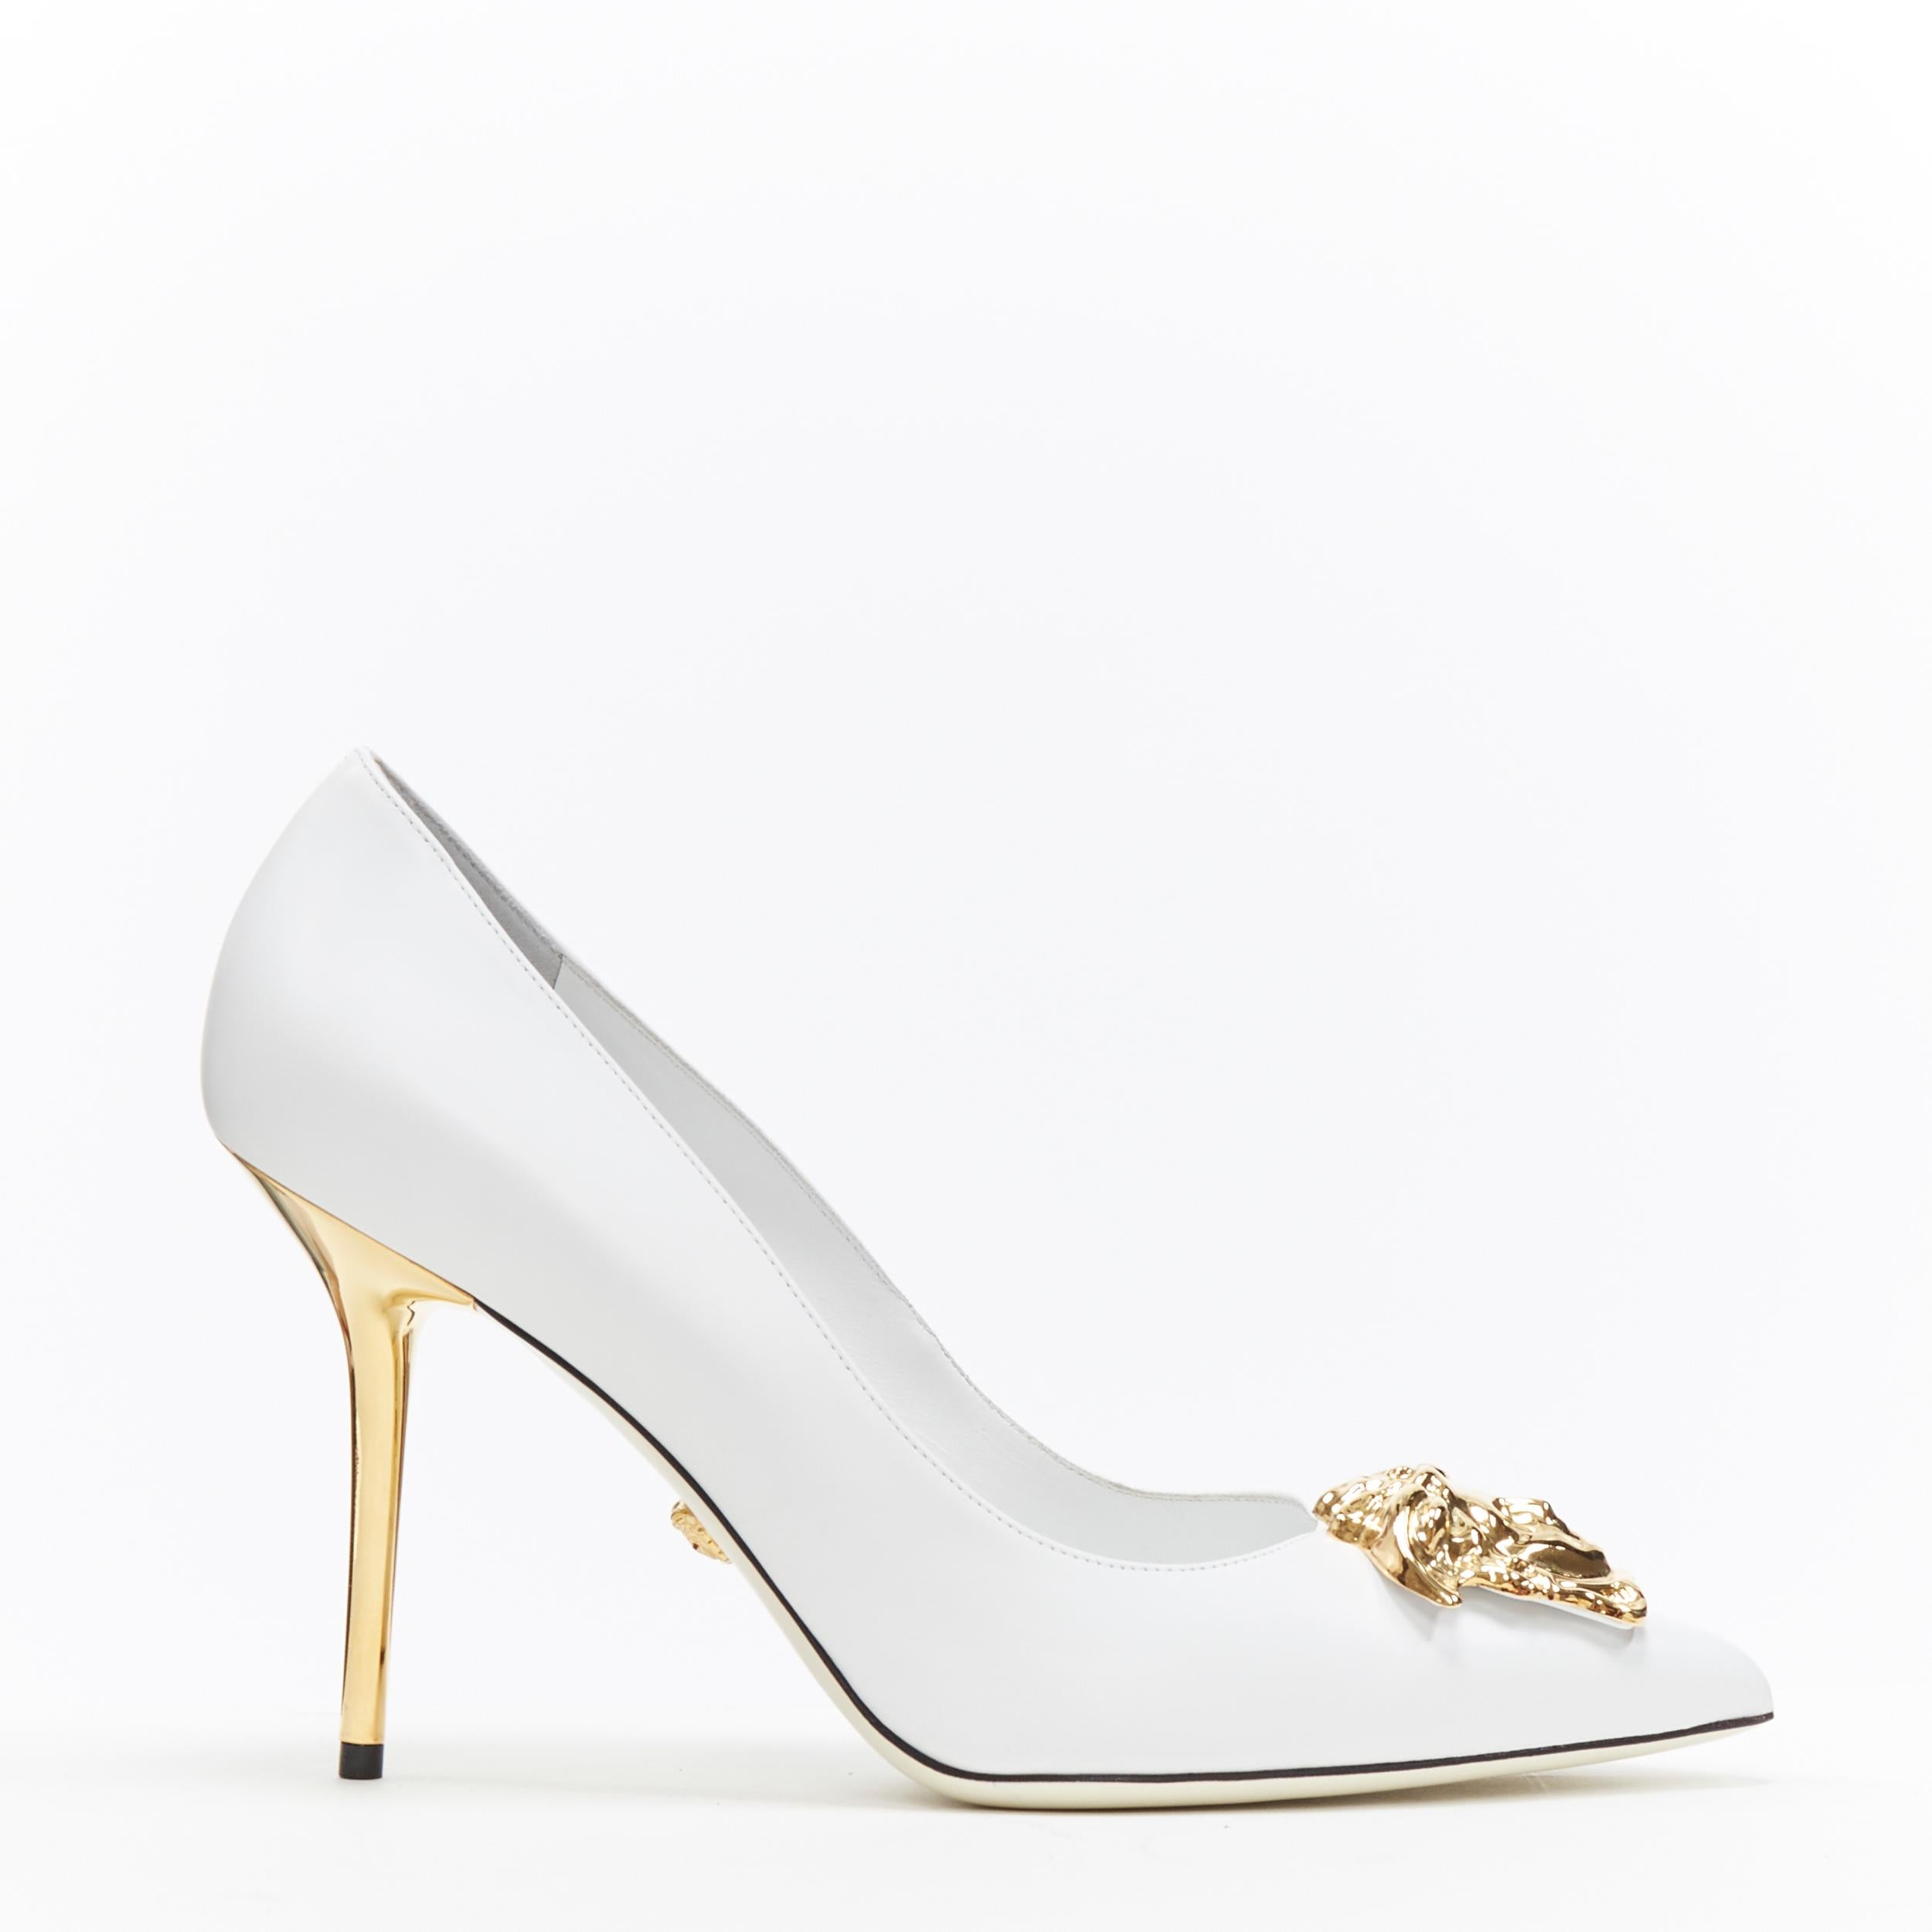 new VERSACE Palazzo Medusa white leather gold pointed toe metal heel pump EU39
Brand: Versace
Designer: Donatella Versace
Collection: 2019
Model Name / Style: Medusa pump
Material: Leather
Color: White
Pattern: Solid
Closure: Slip on
Lining